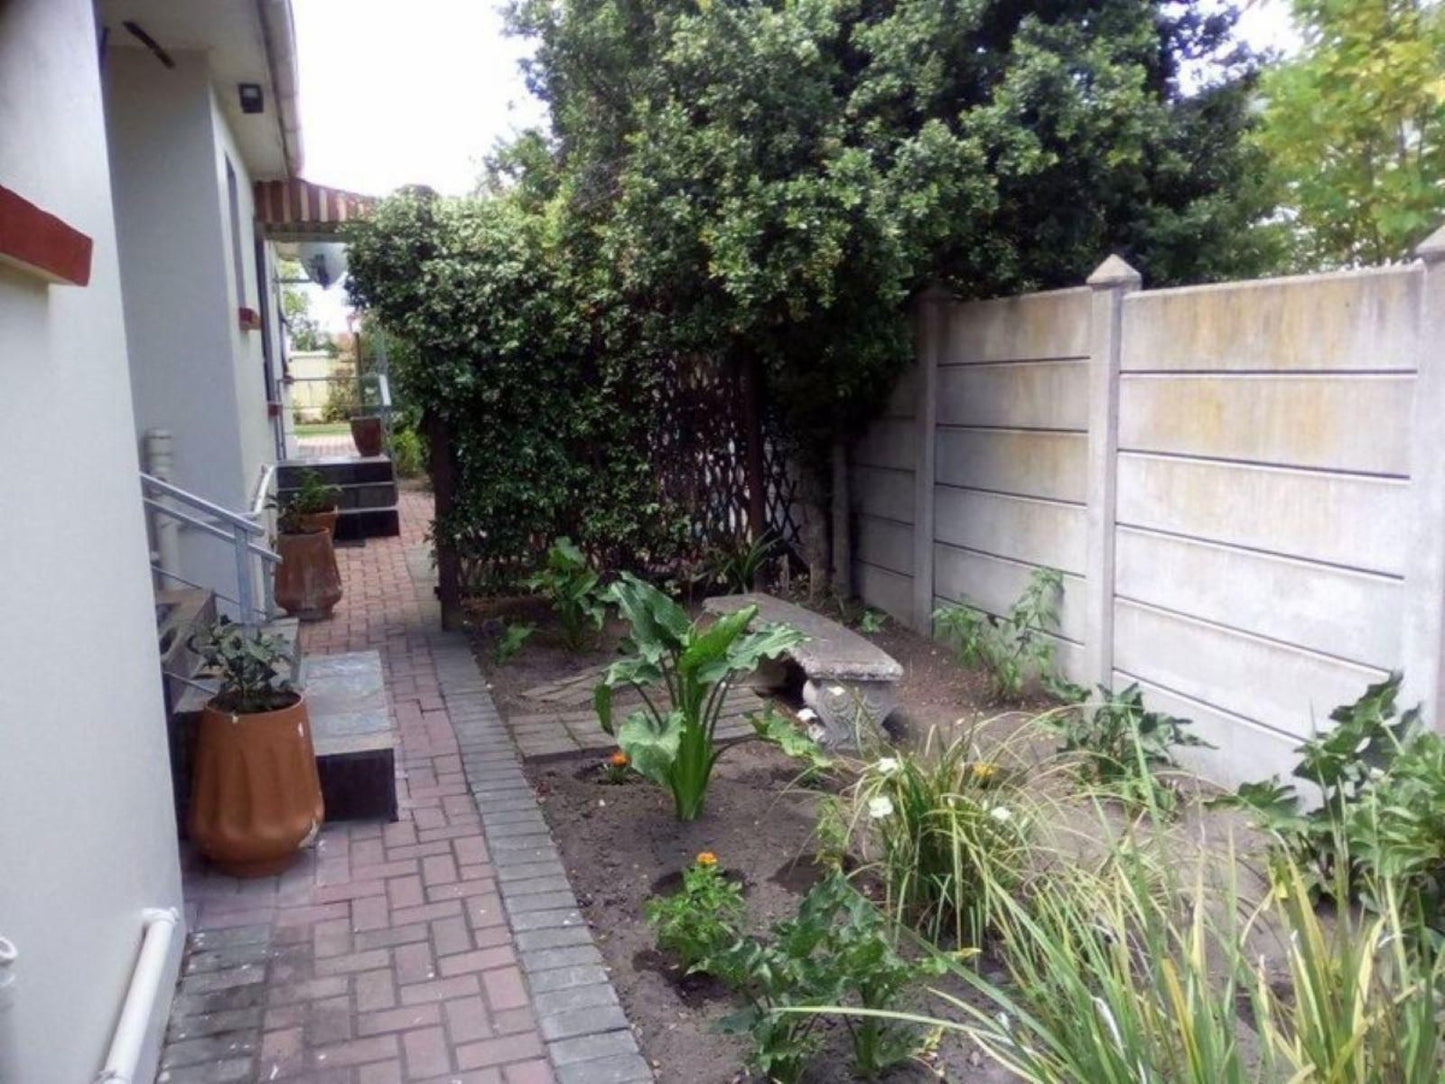 40B Overnight Accommodation Humansdorp Eastern Cape South Africa House, Building, Architecture, Plant, Nature, Garden